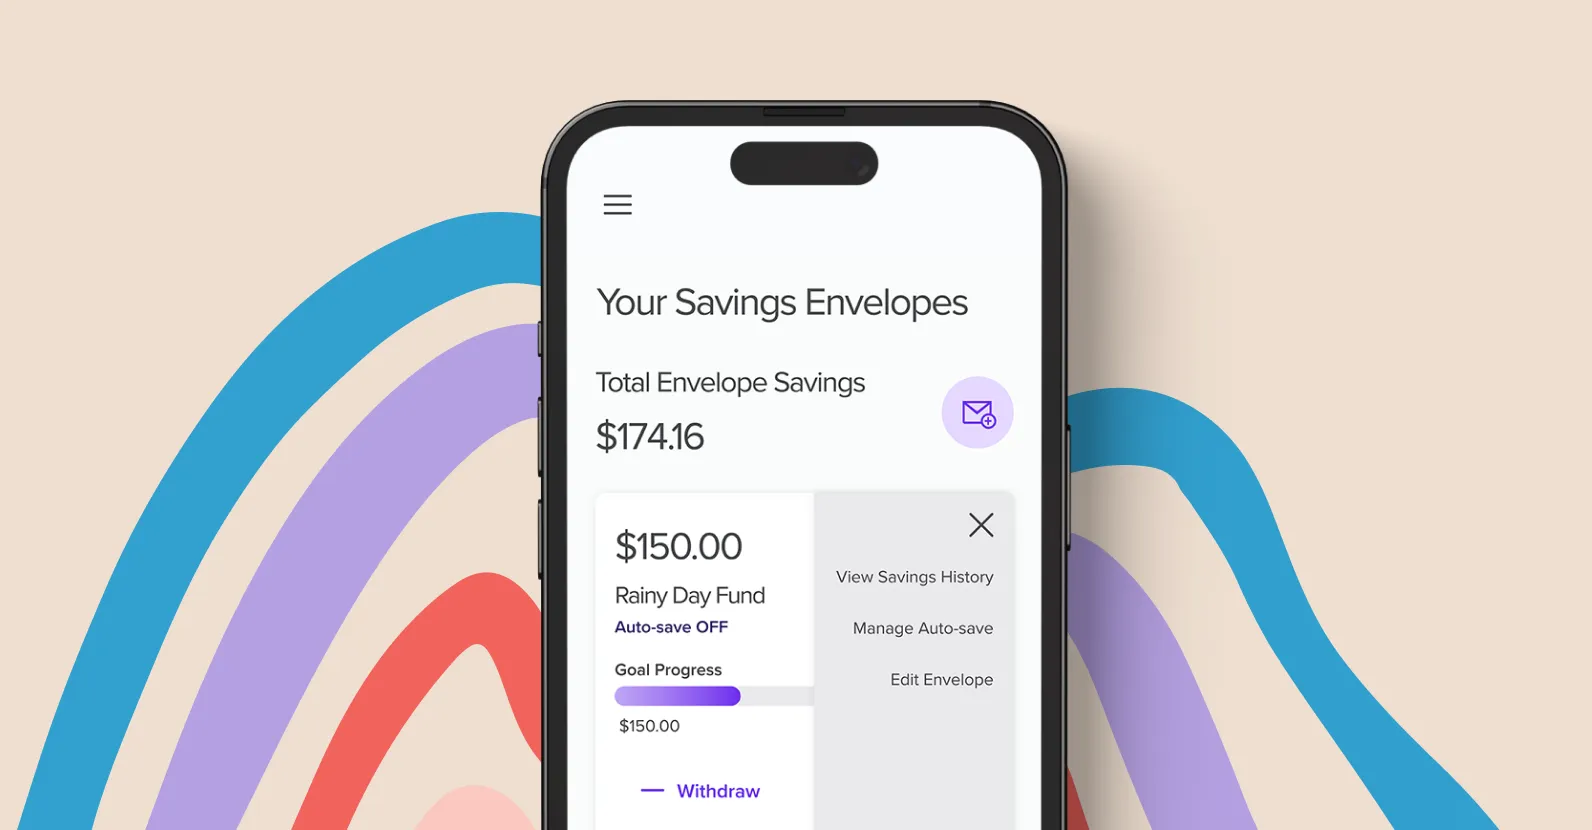 Phone showing wisely savings envelope savings screen with category options.